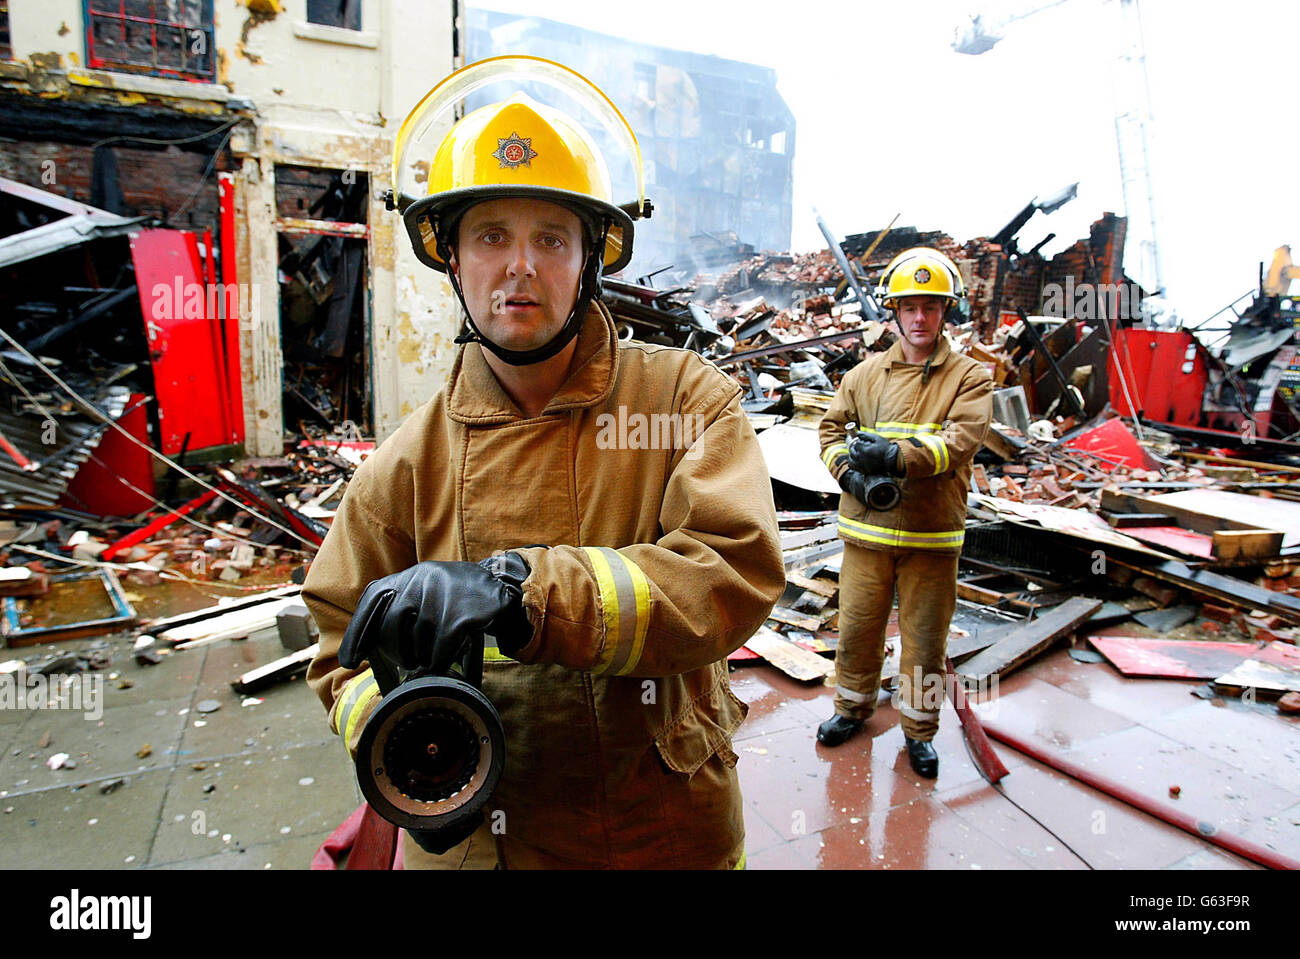 Disasters and Accidents - Arcade Fire - Blackpool Stock Photo